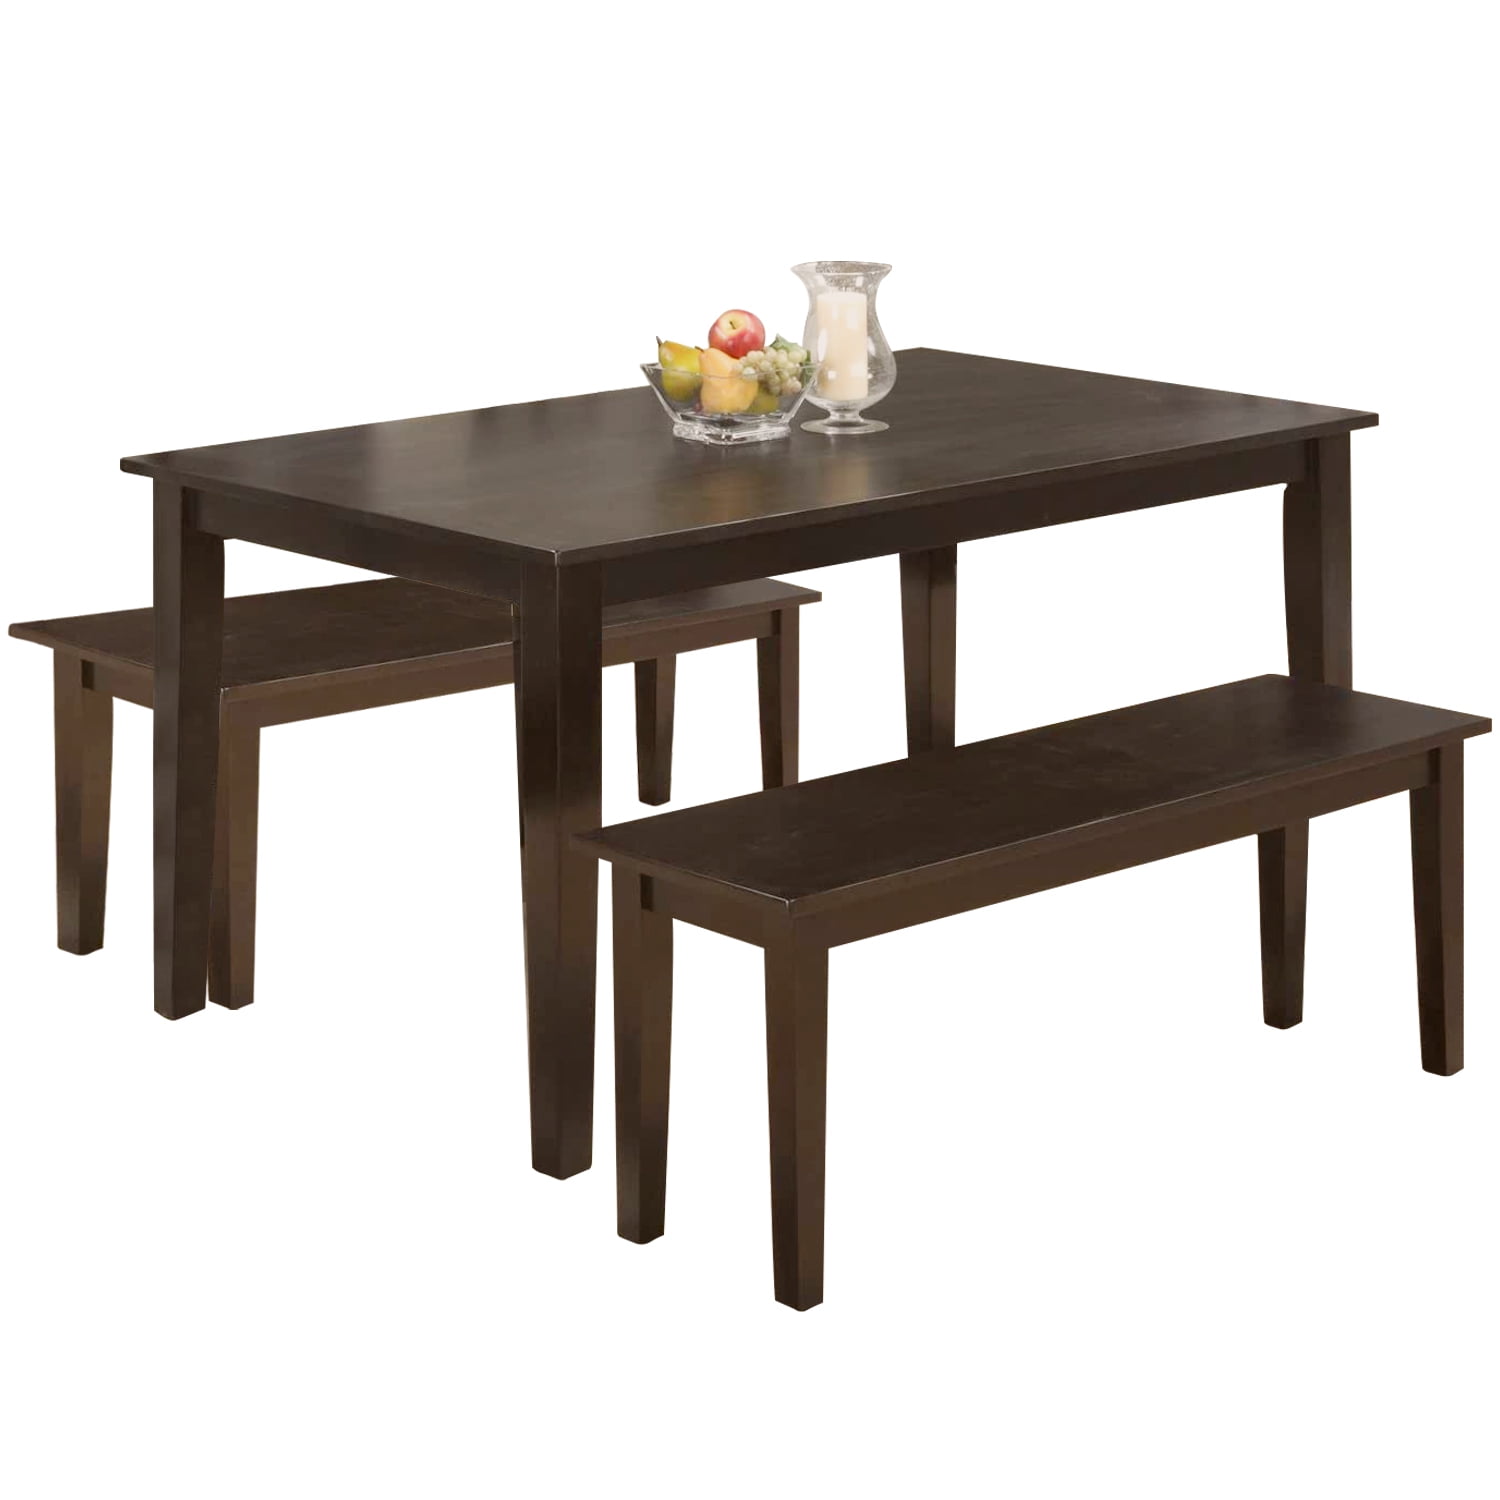 Fdw Dining Table Set And Bench For 4, Large Dining Room Table And Chairs